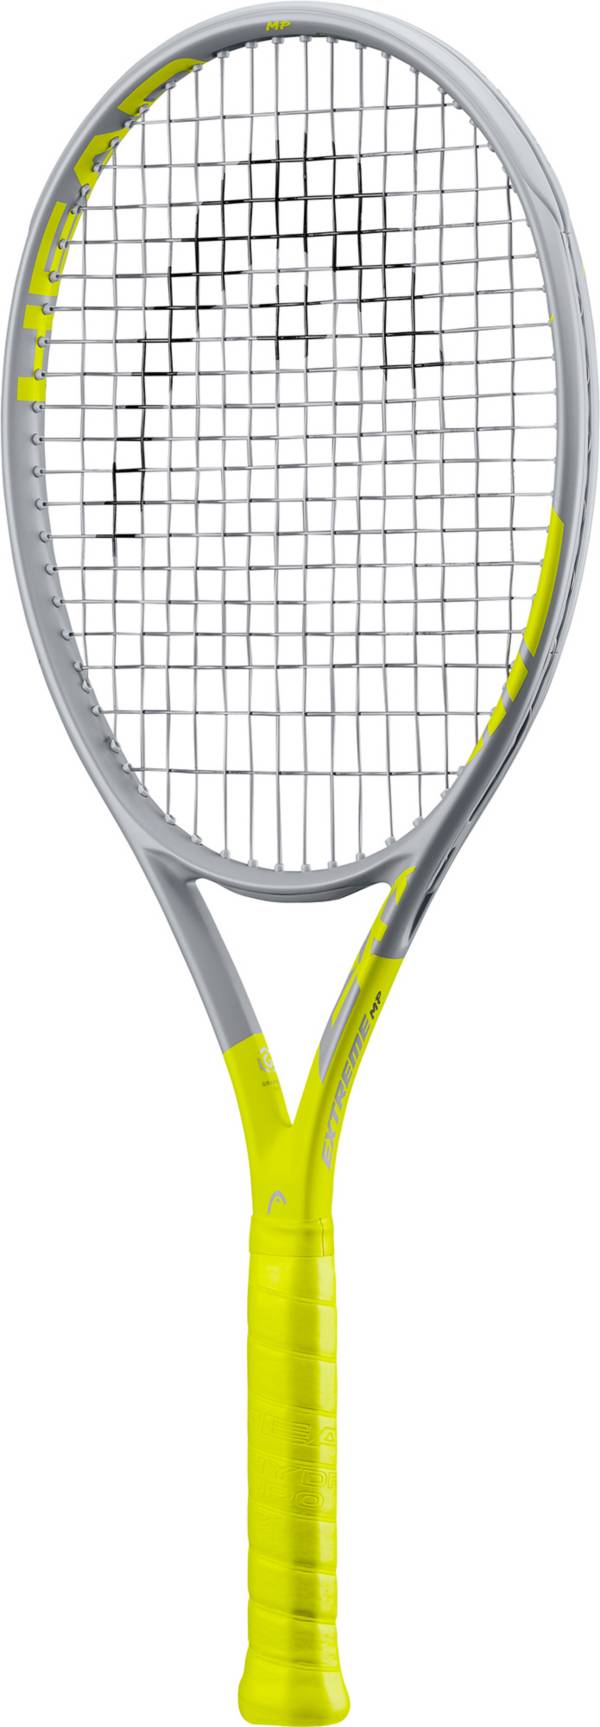 Head Graphene 360+ Extreme MP Tennis Racquet - Unstrung product image